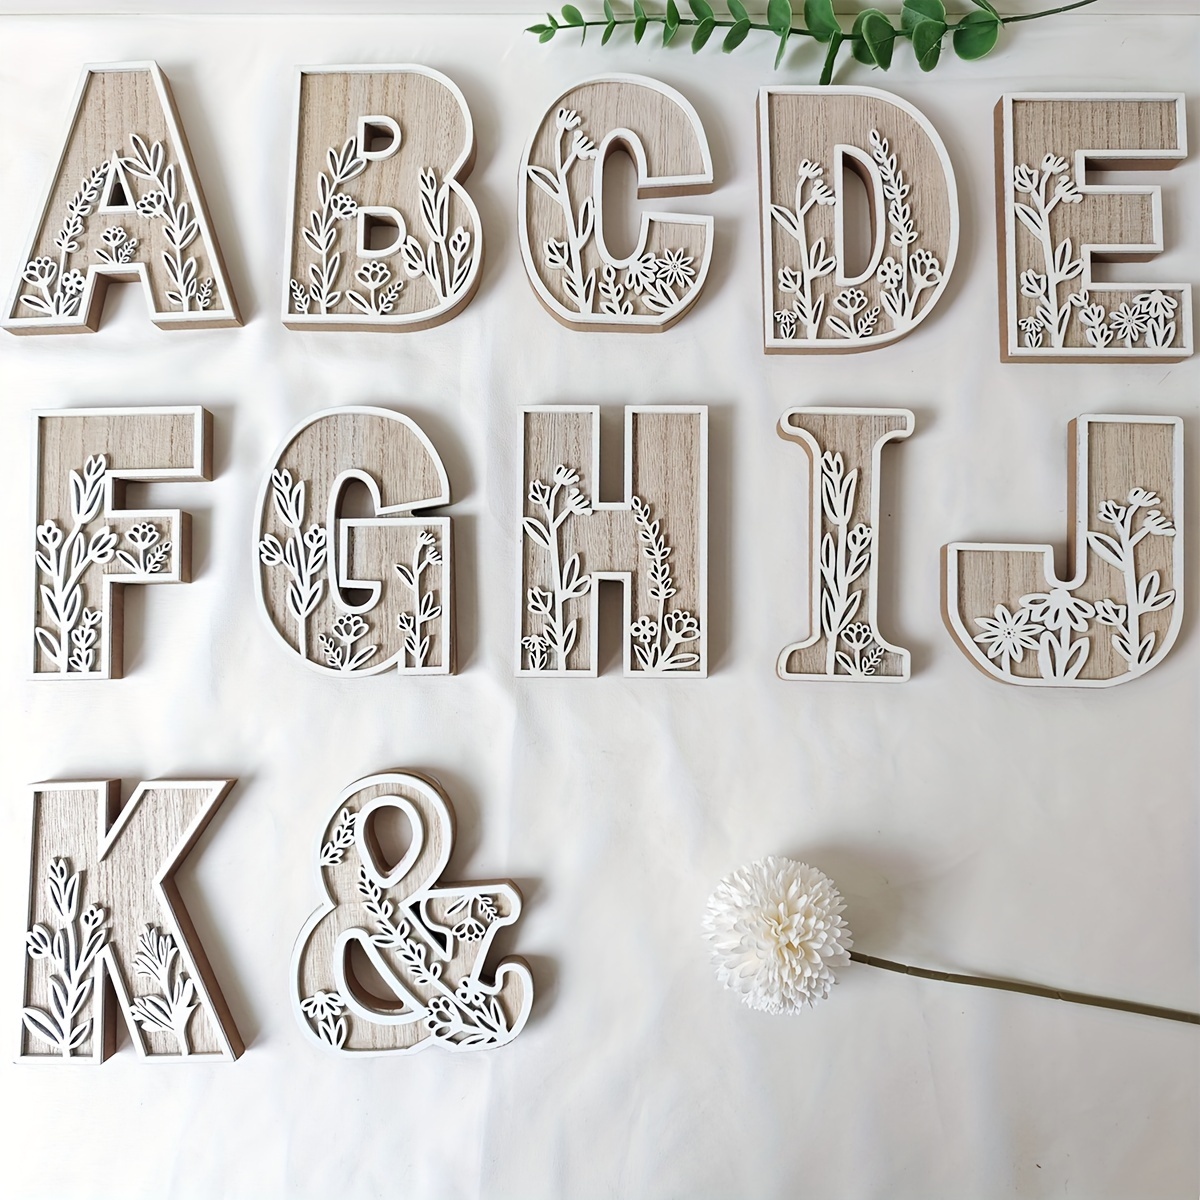 

1pc Floral Carved Wooden Letter, Rustic Wood Alphabet Wall Decor, Room Name Sign, Wildflowers Wall Art Letters, Wedding Decoration Letters, French Country Style, Home Decor - 4.92 X 2.36-5.51 Inches